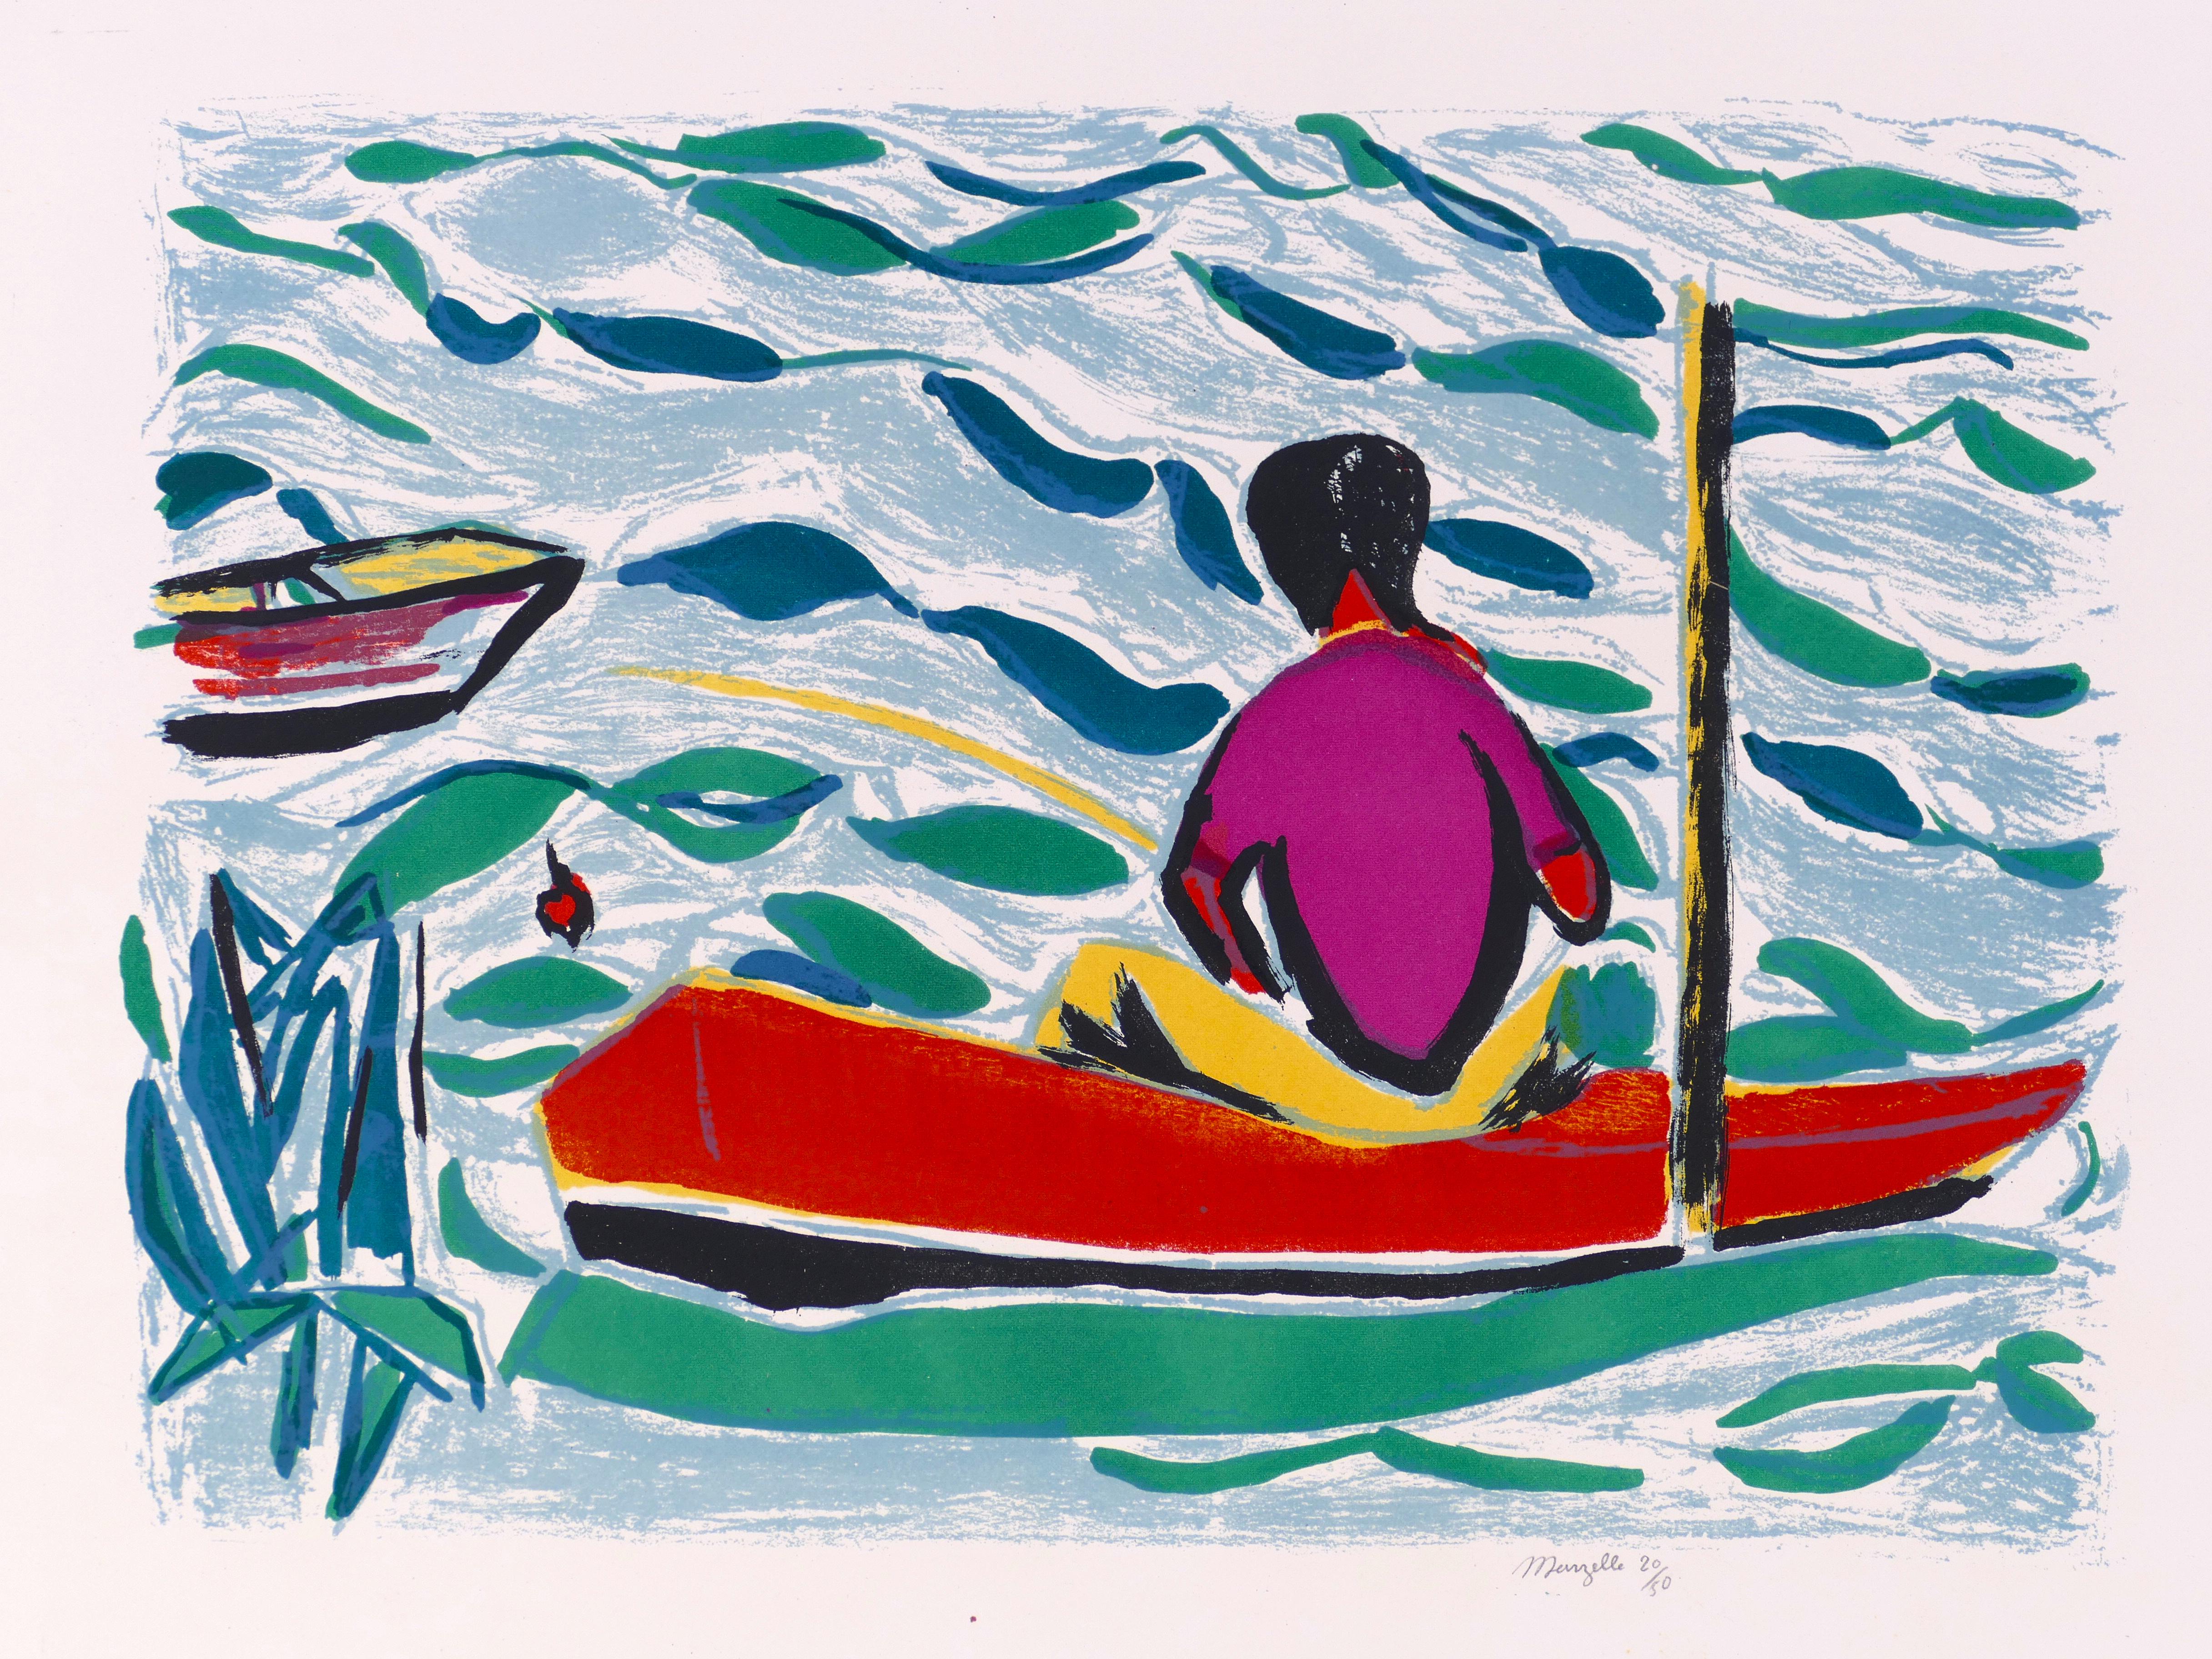 Image dimensions: 25.8 x 35.5 cm.

Le pêcheur is a beautiful color lithograph on paper realized by the French artist Jean Marzelle (Lauzun,1916-2005).

Signed and numbered in Arabic numerals and in pencil on lower right margin. 

A colorful original